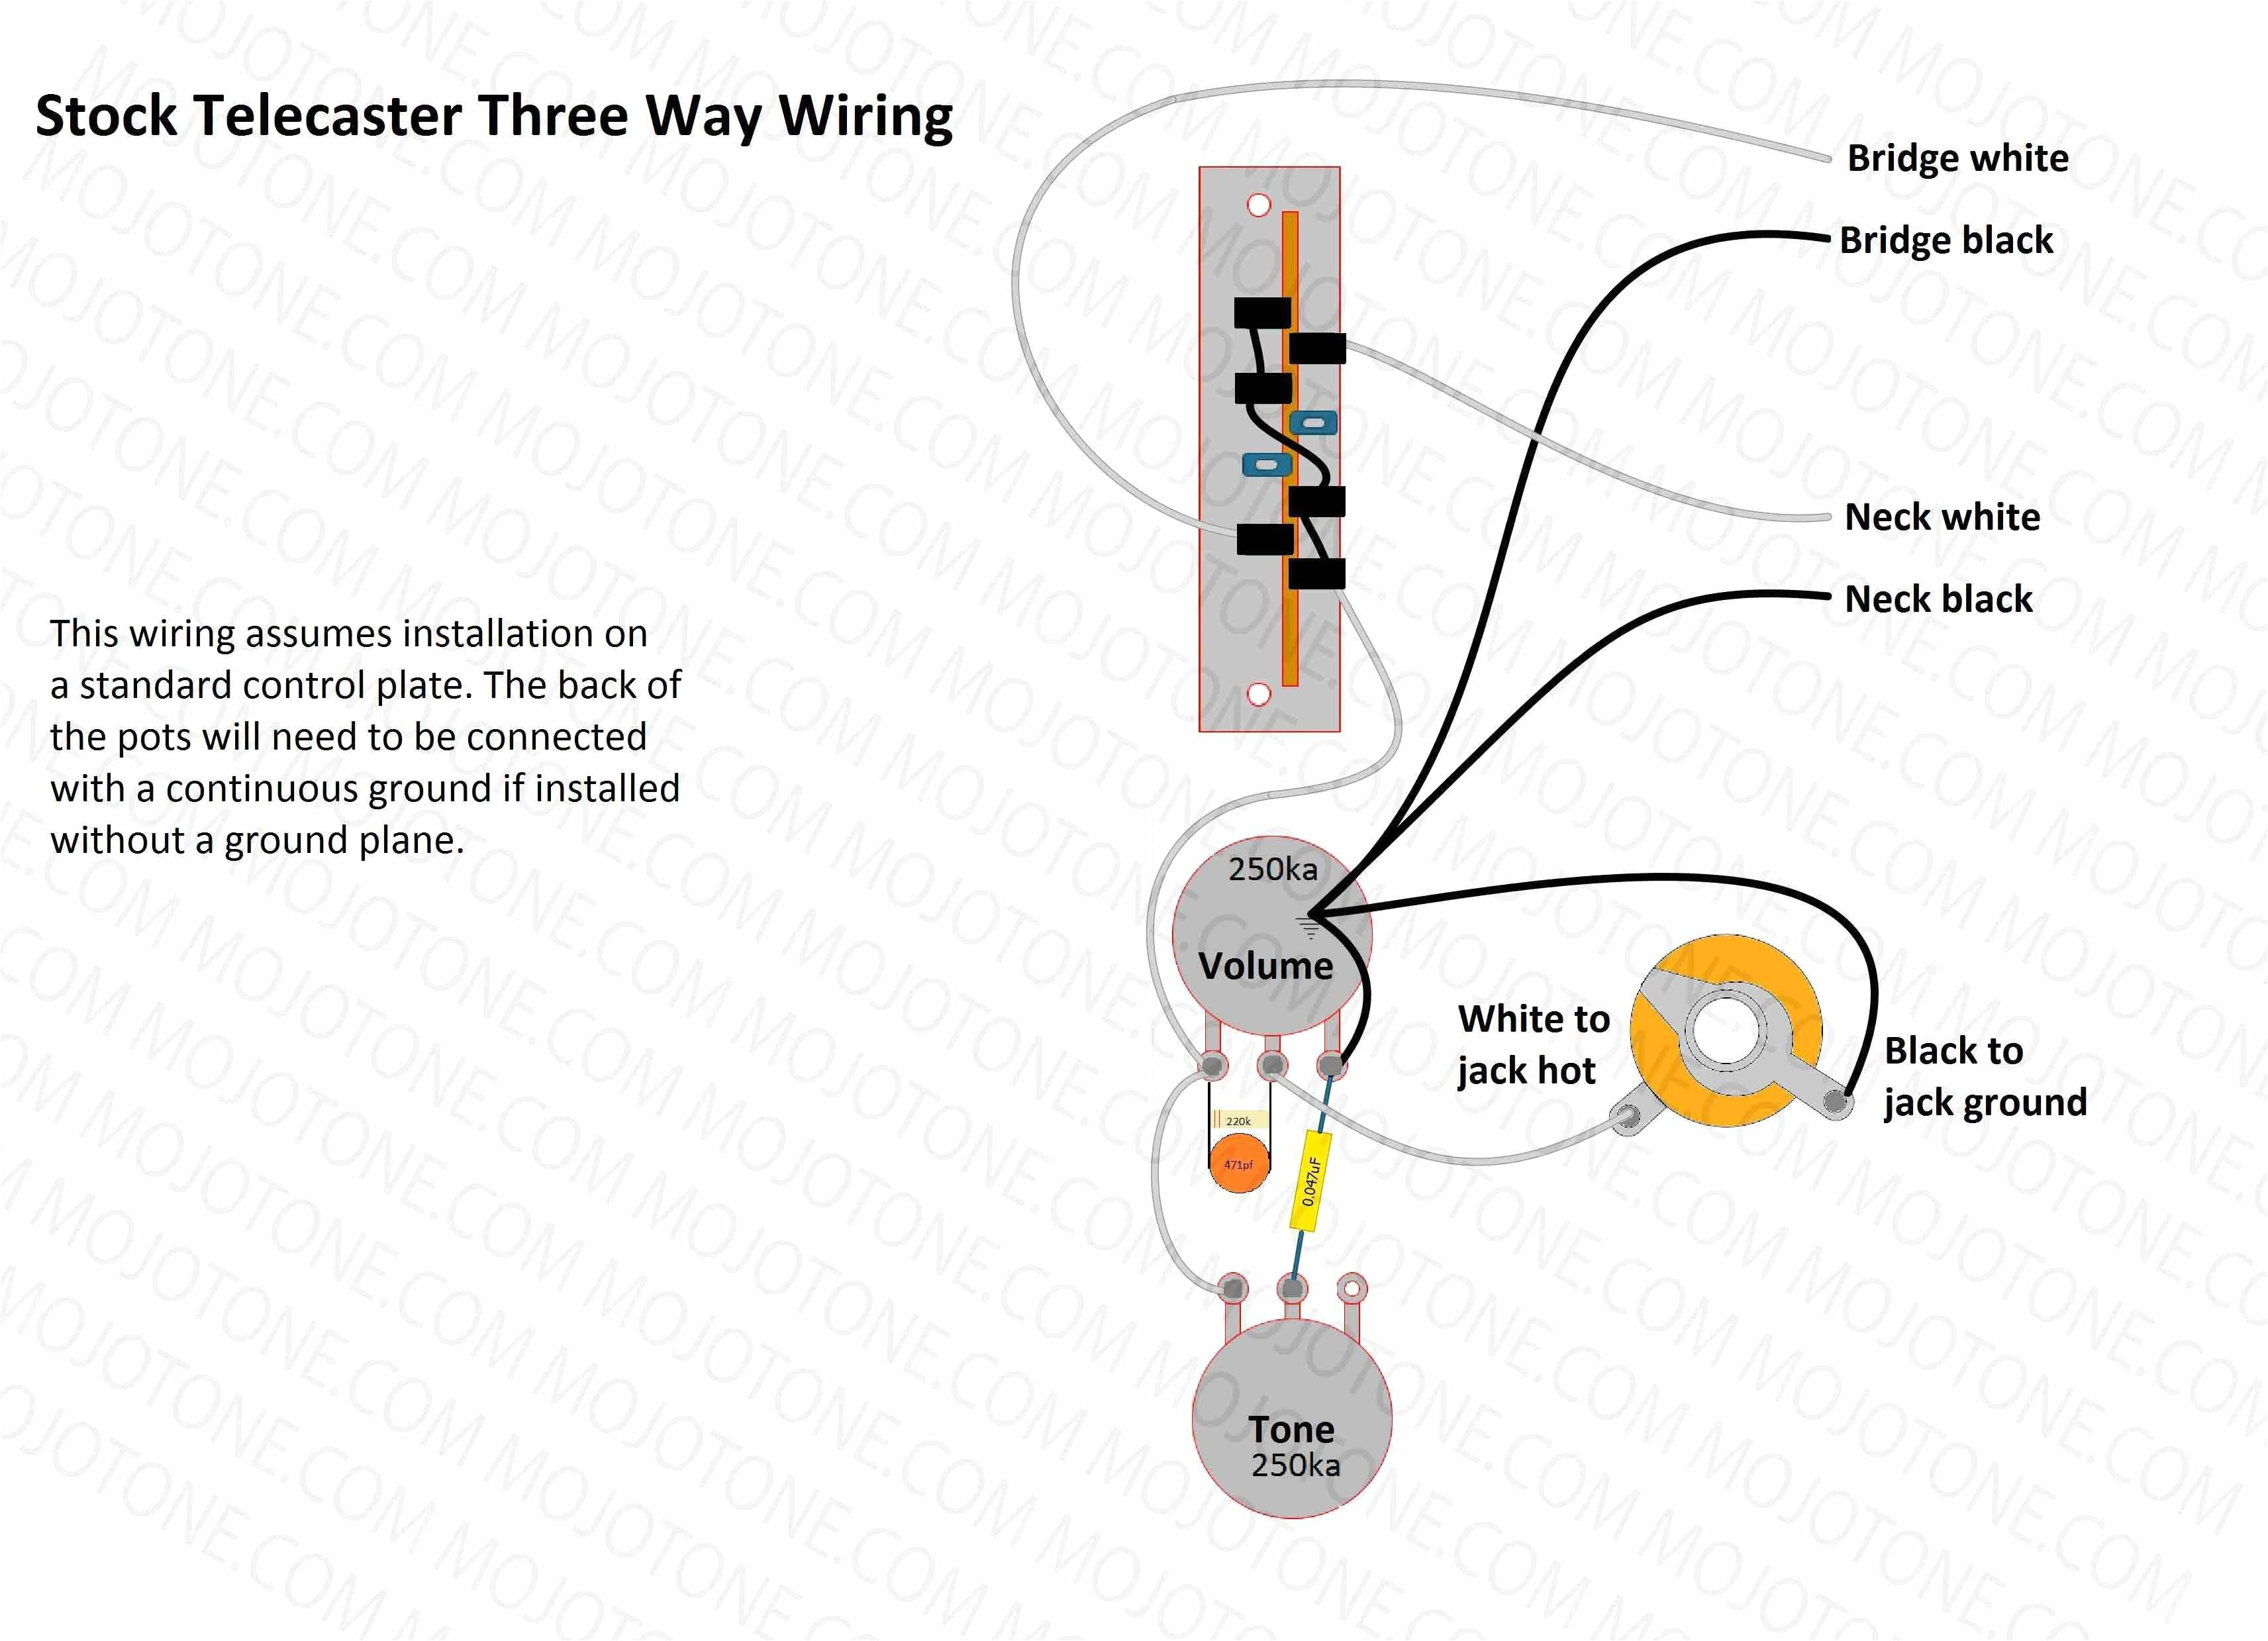 wiring diagram for telecaster free download schematic wiring wiring diagram for telecaster free download schematic